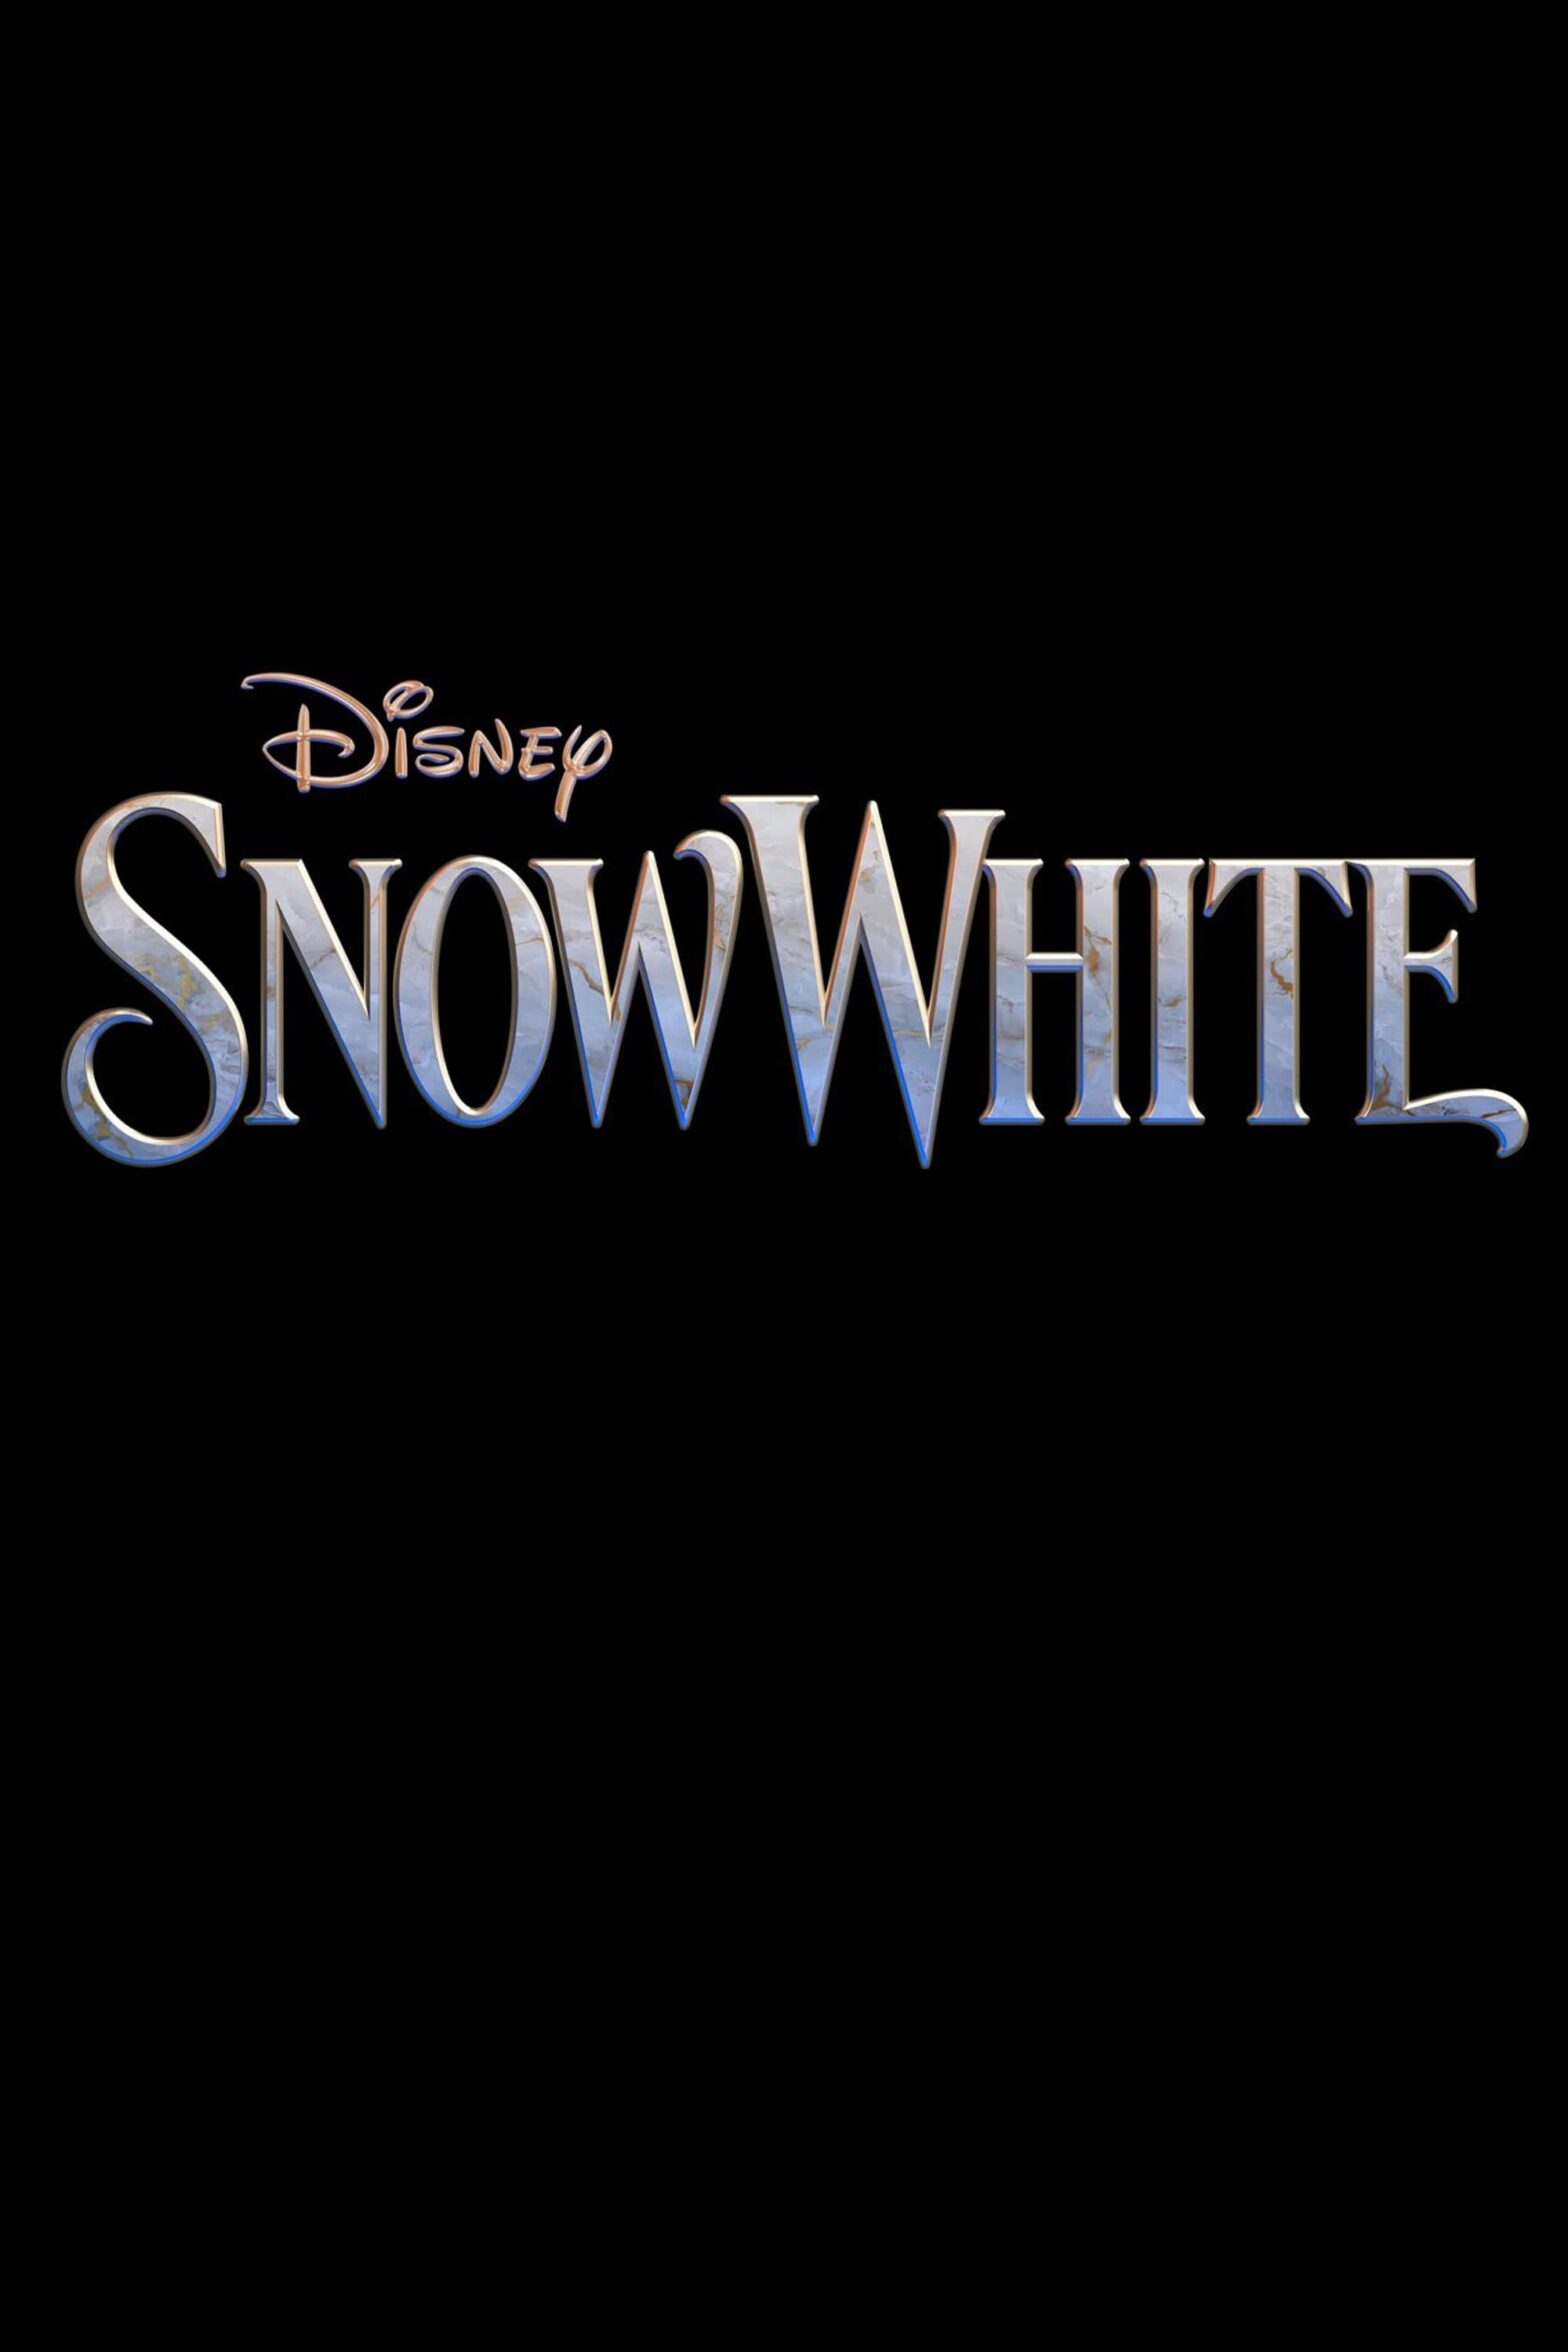 Poster for the movie "Snow White"